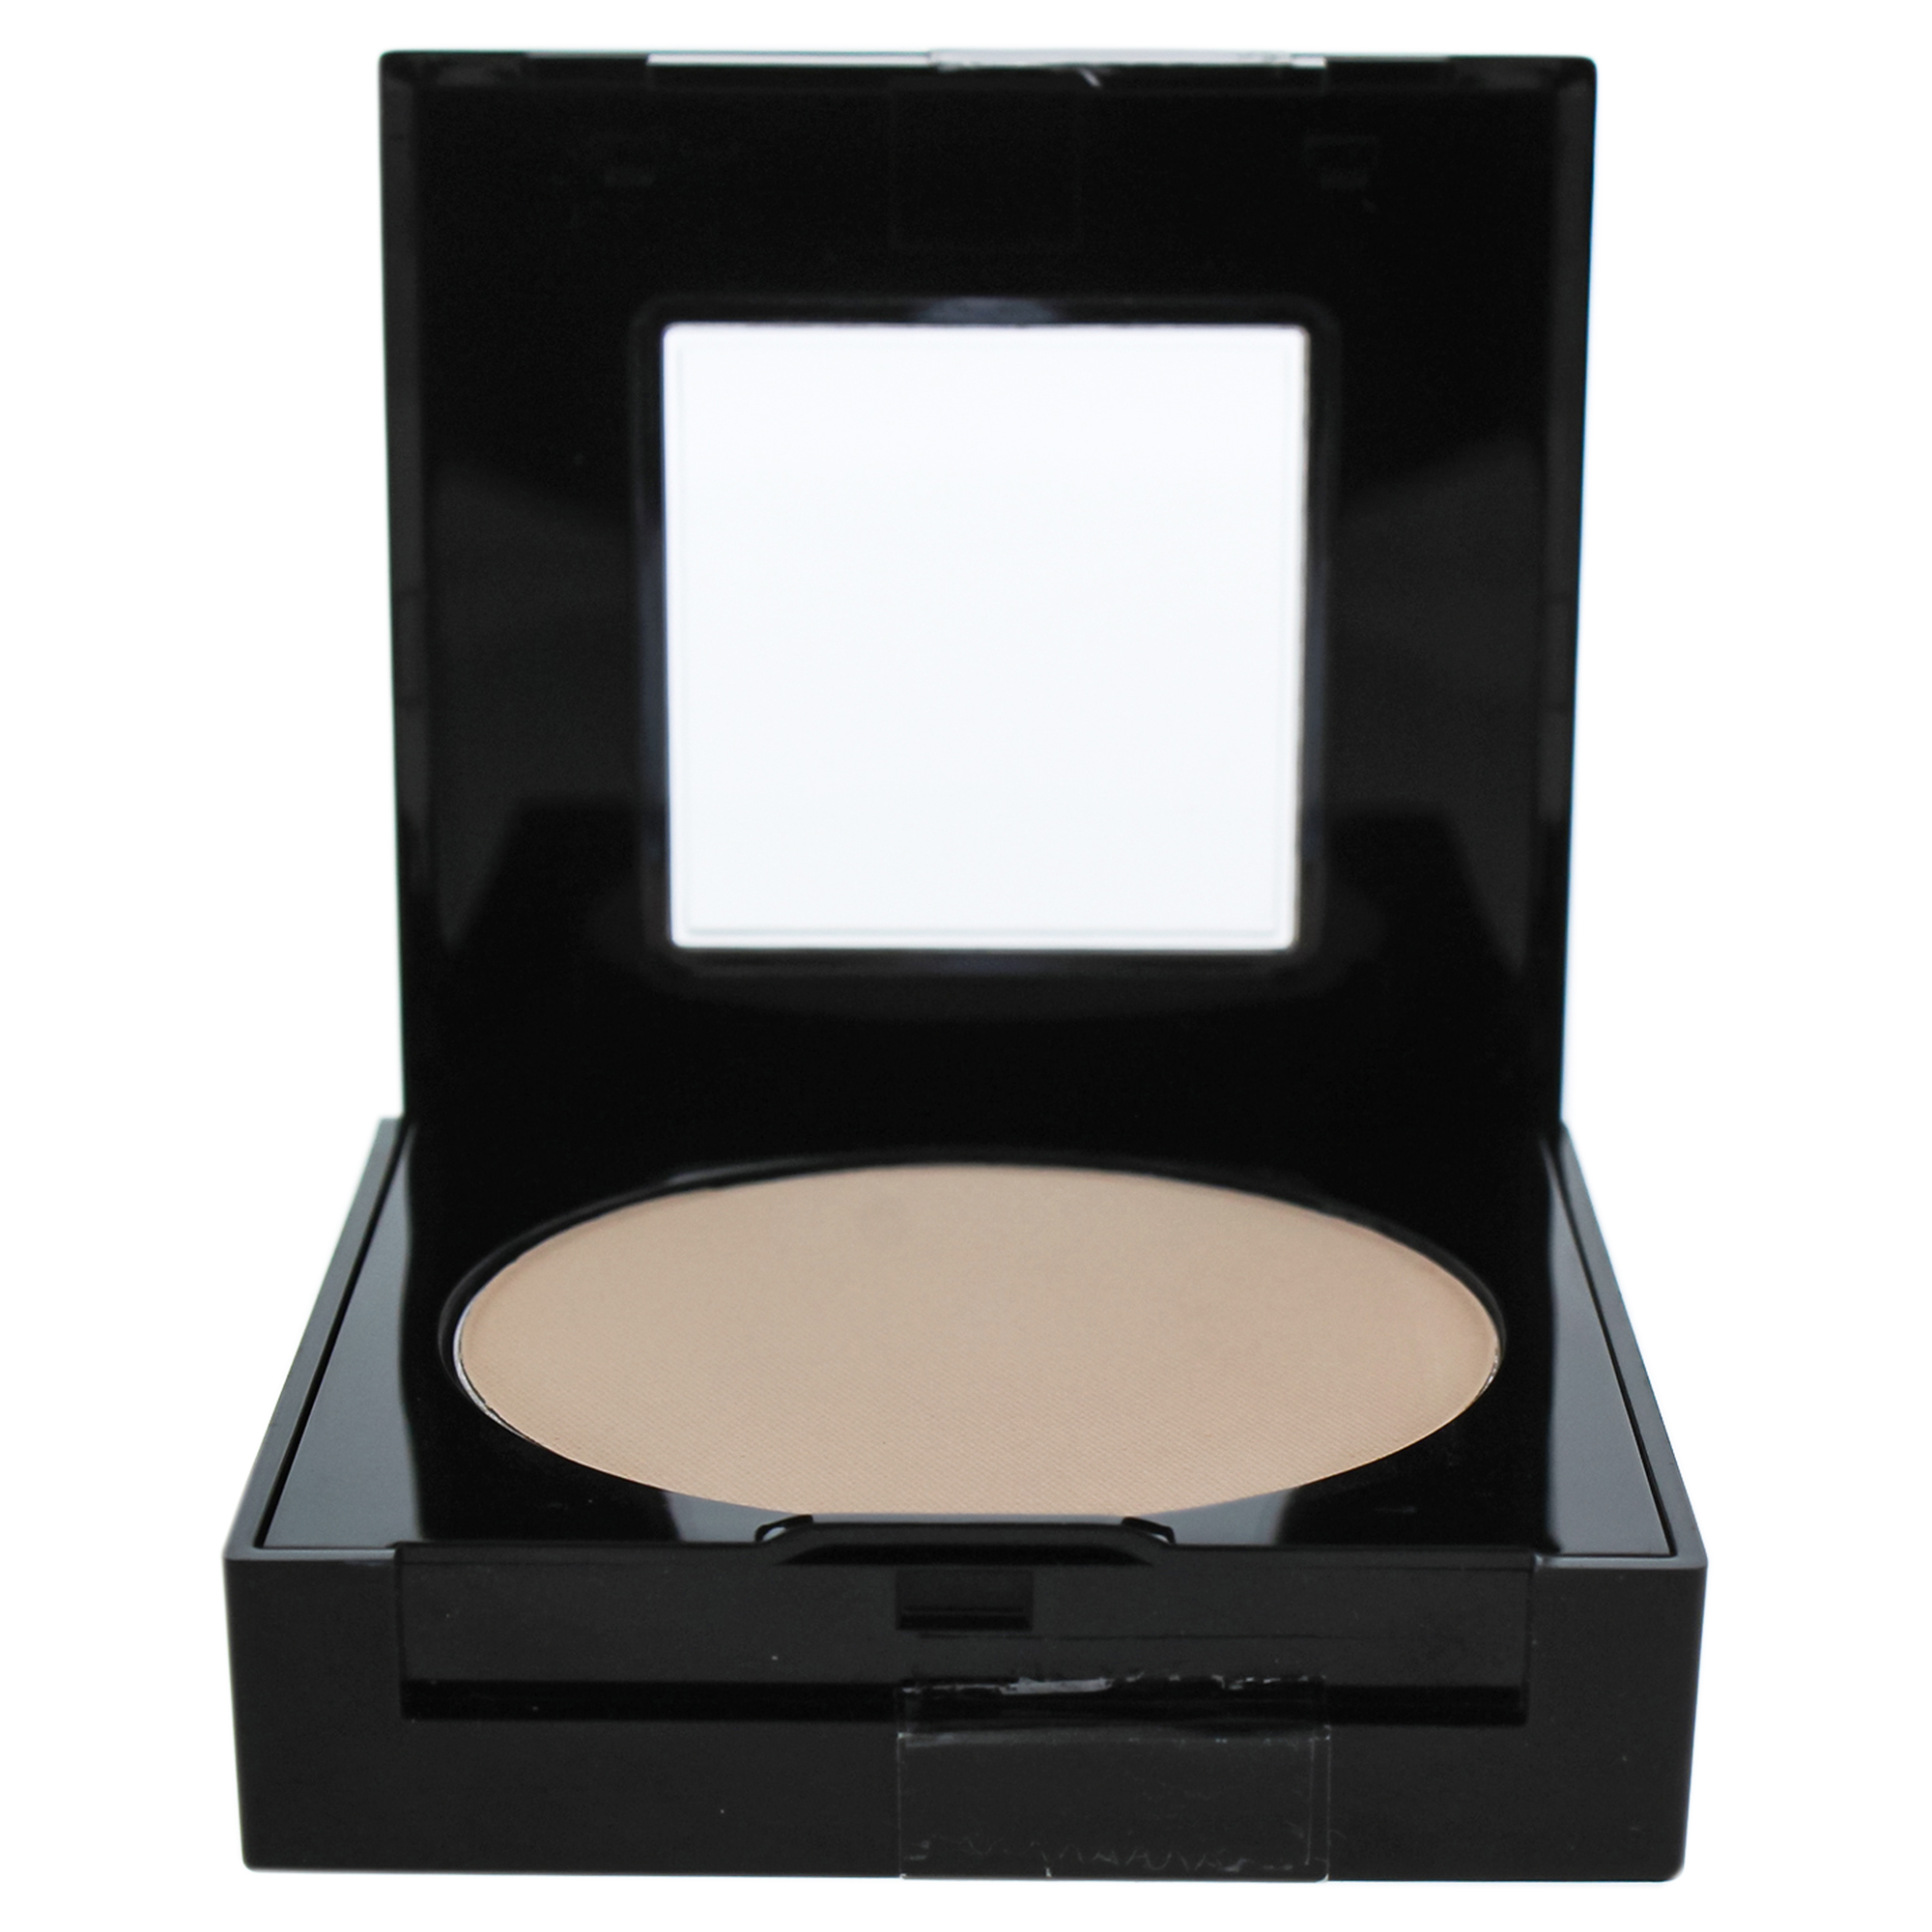 Maybelline Fit Me Set + Smooth Powder, Classic Ivory - image 1 of 2